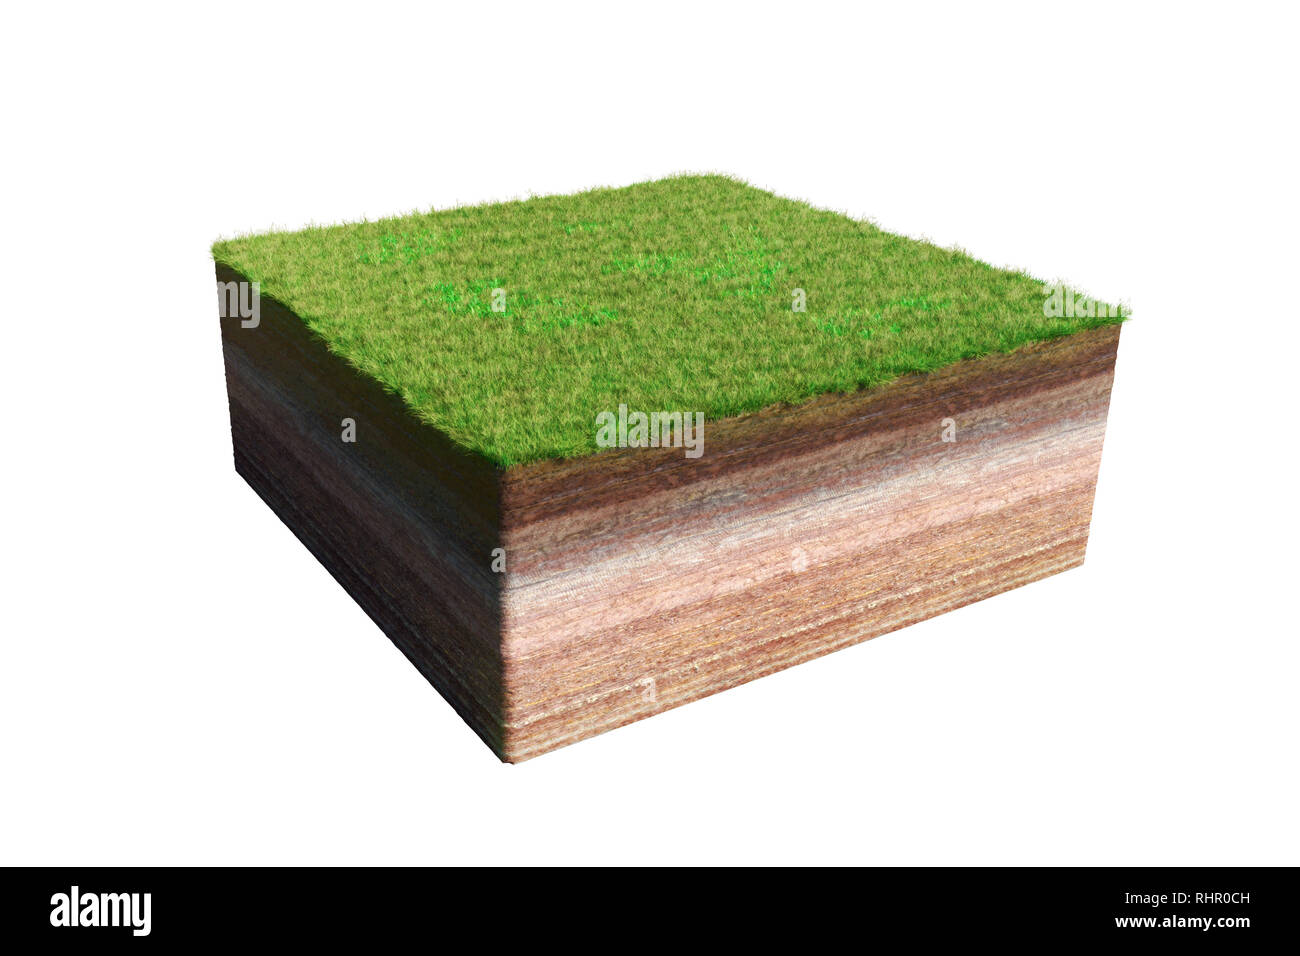 model of a cross section of ground with grass (3d illustration, isolated on white background) Stock Photo